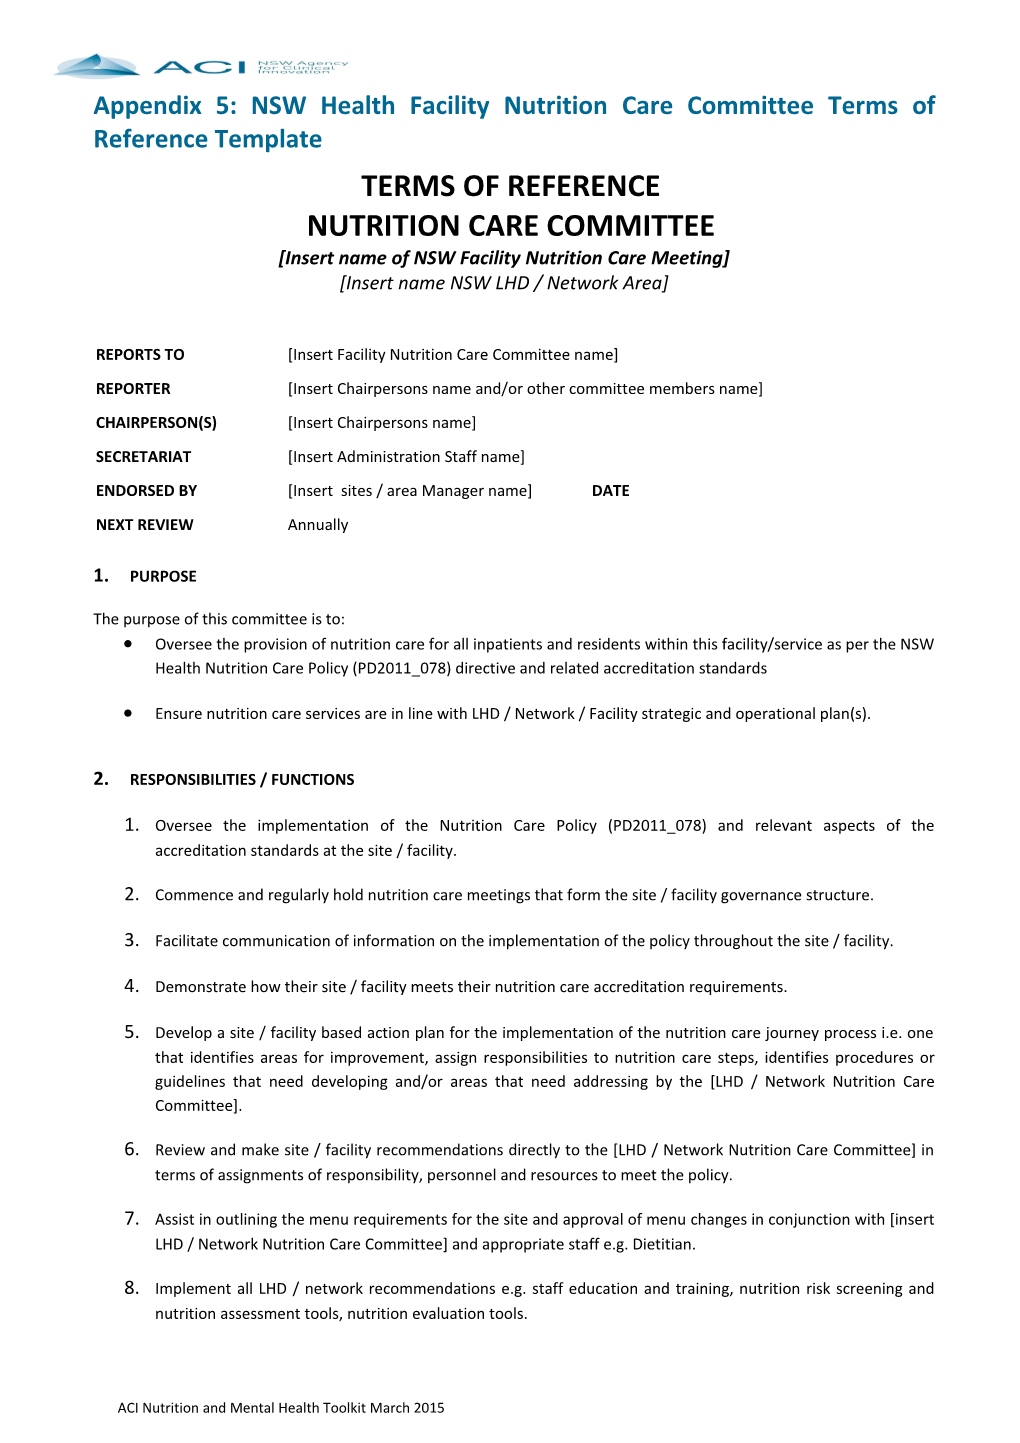 Appendix 5: NSW Health Facility Nutrition Care Committee Terms of Reference Template